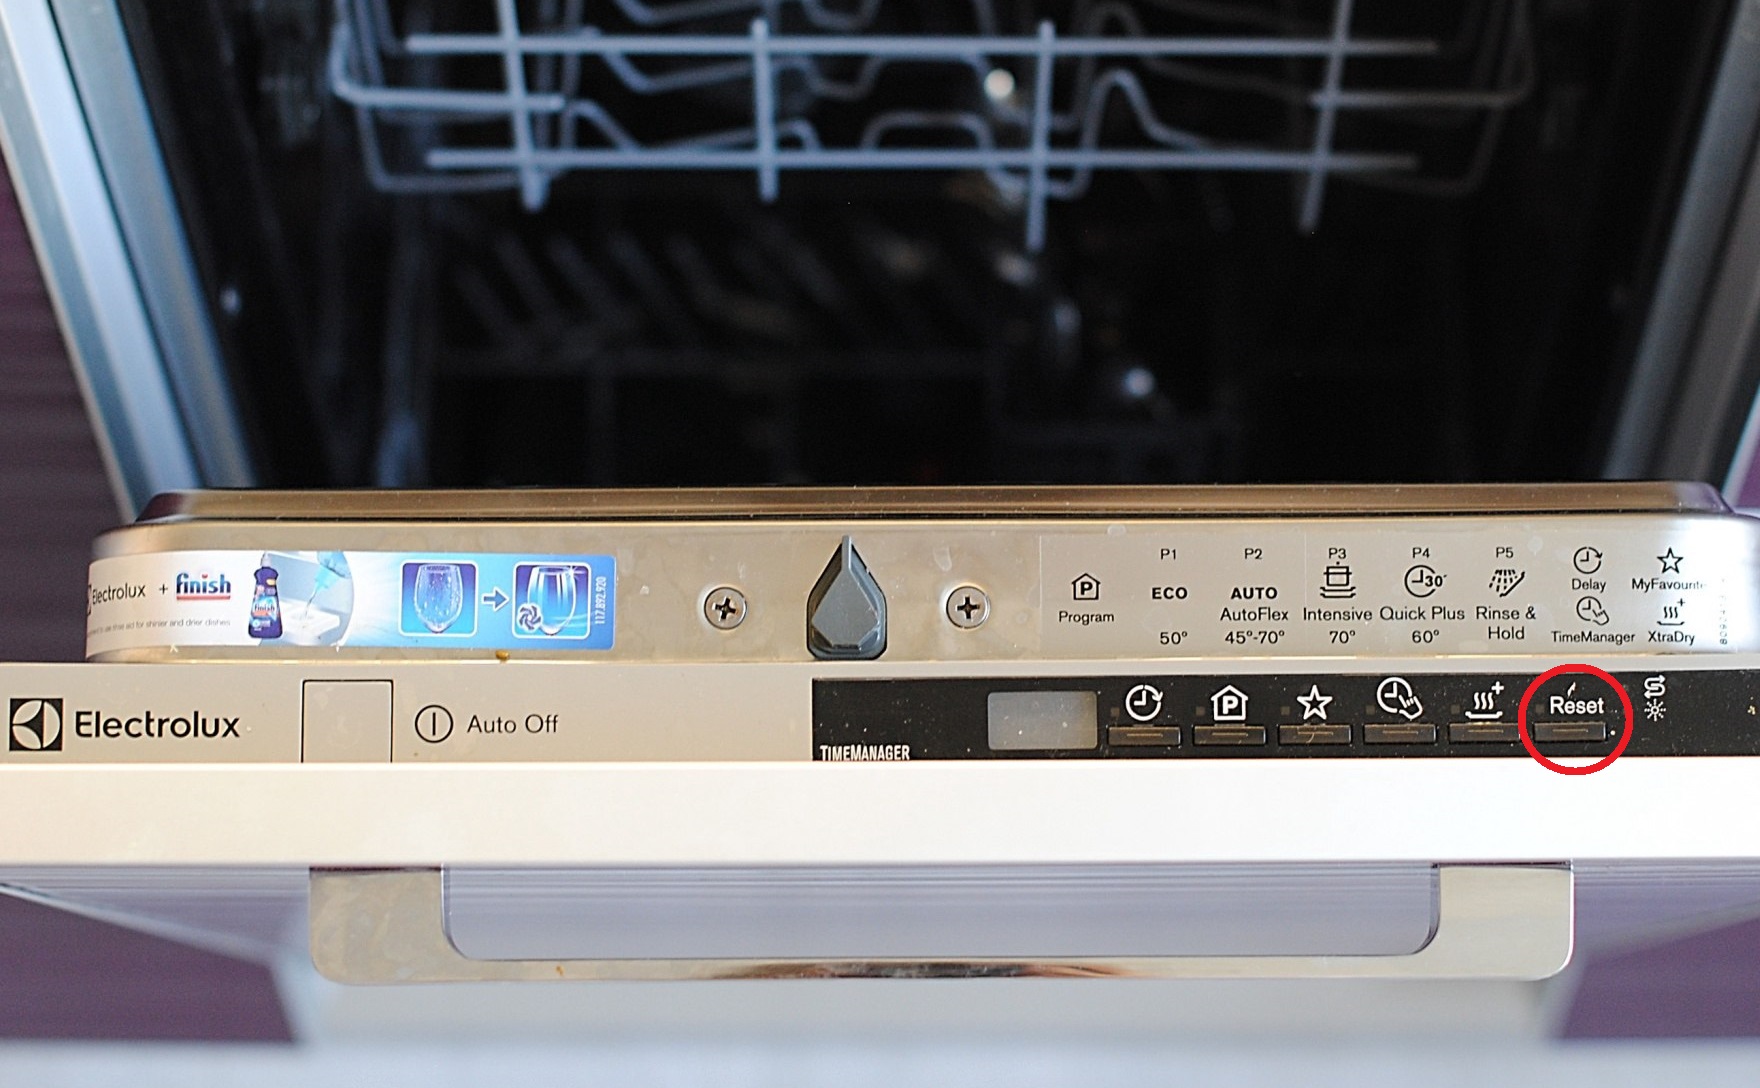 How to reset the program on an Electrolux dishwasher